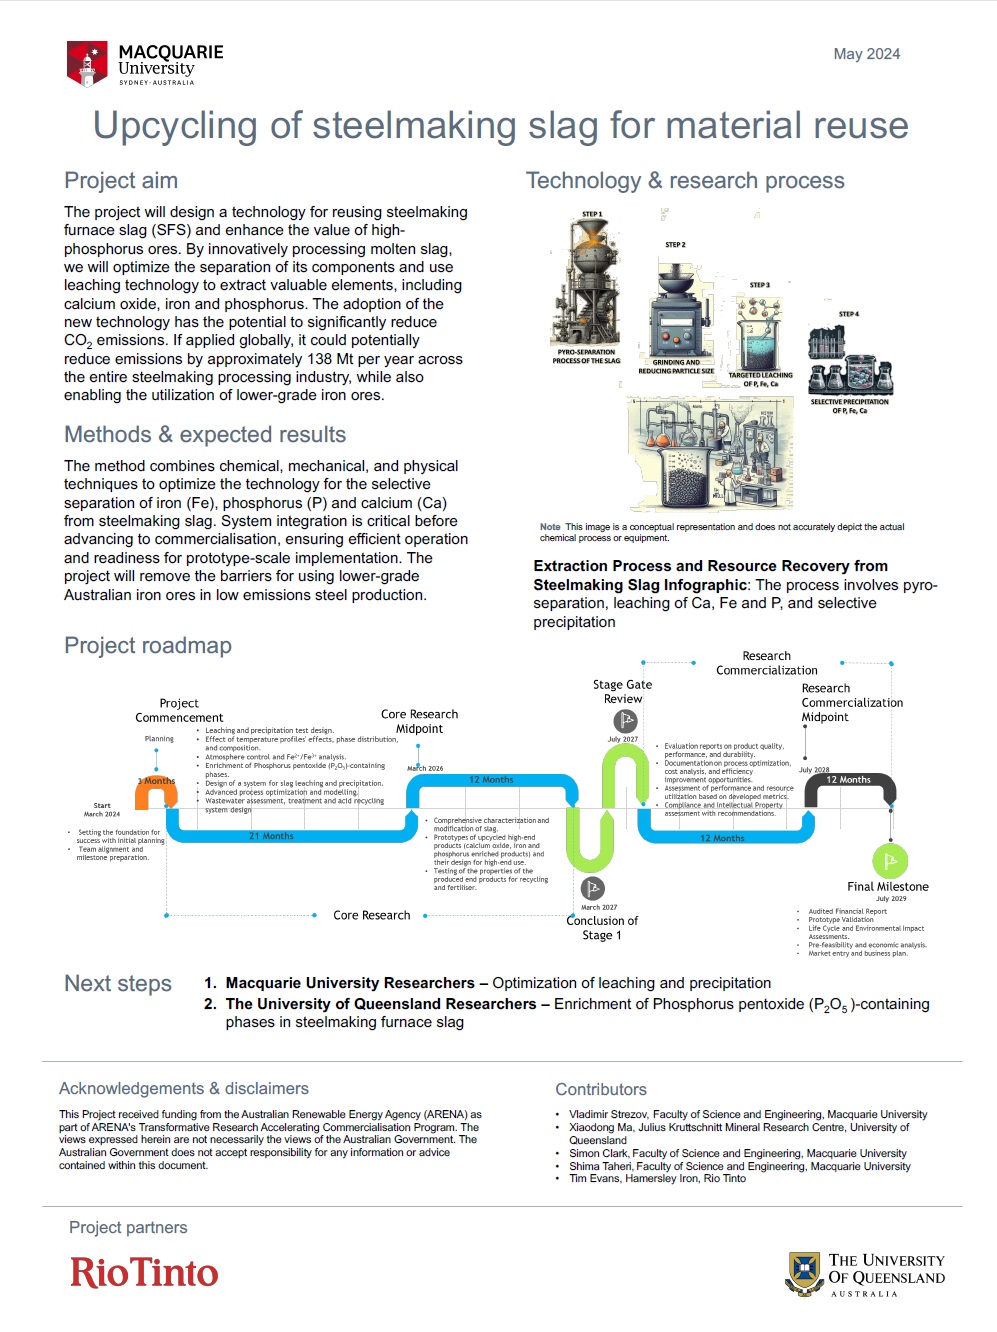 Macquarie University – upcycling of steelmaking slag for material reuse project - poster - cover